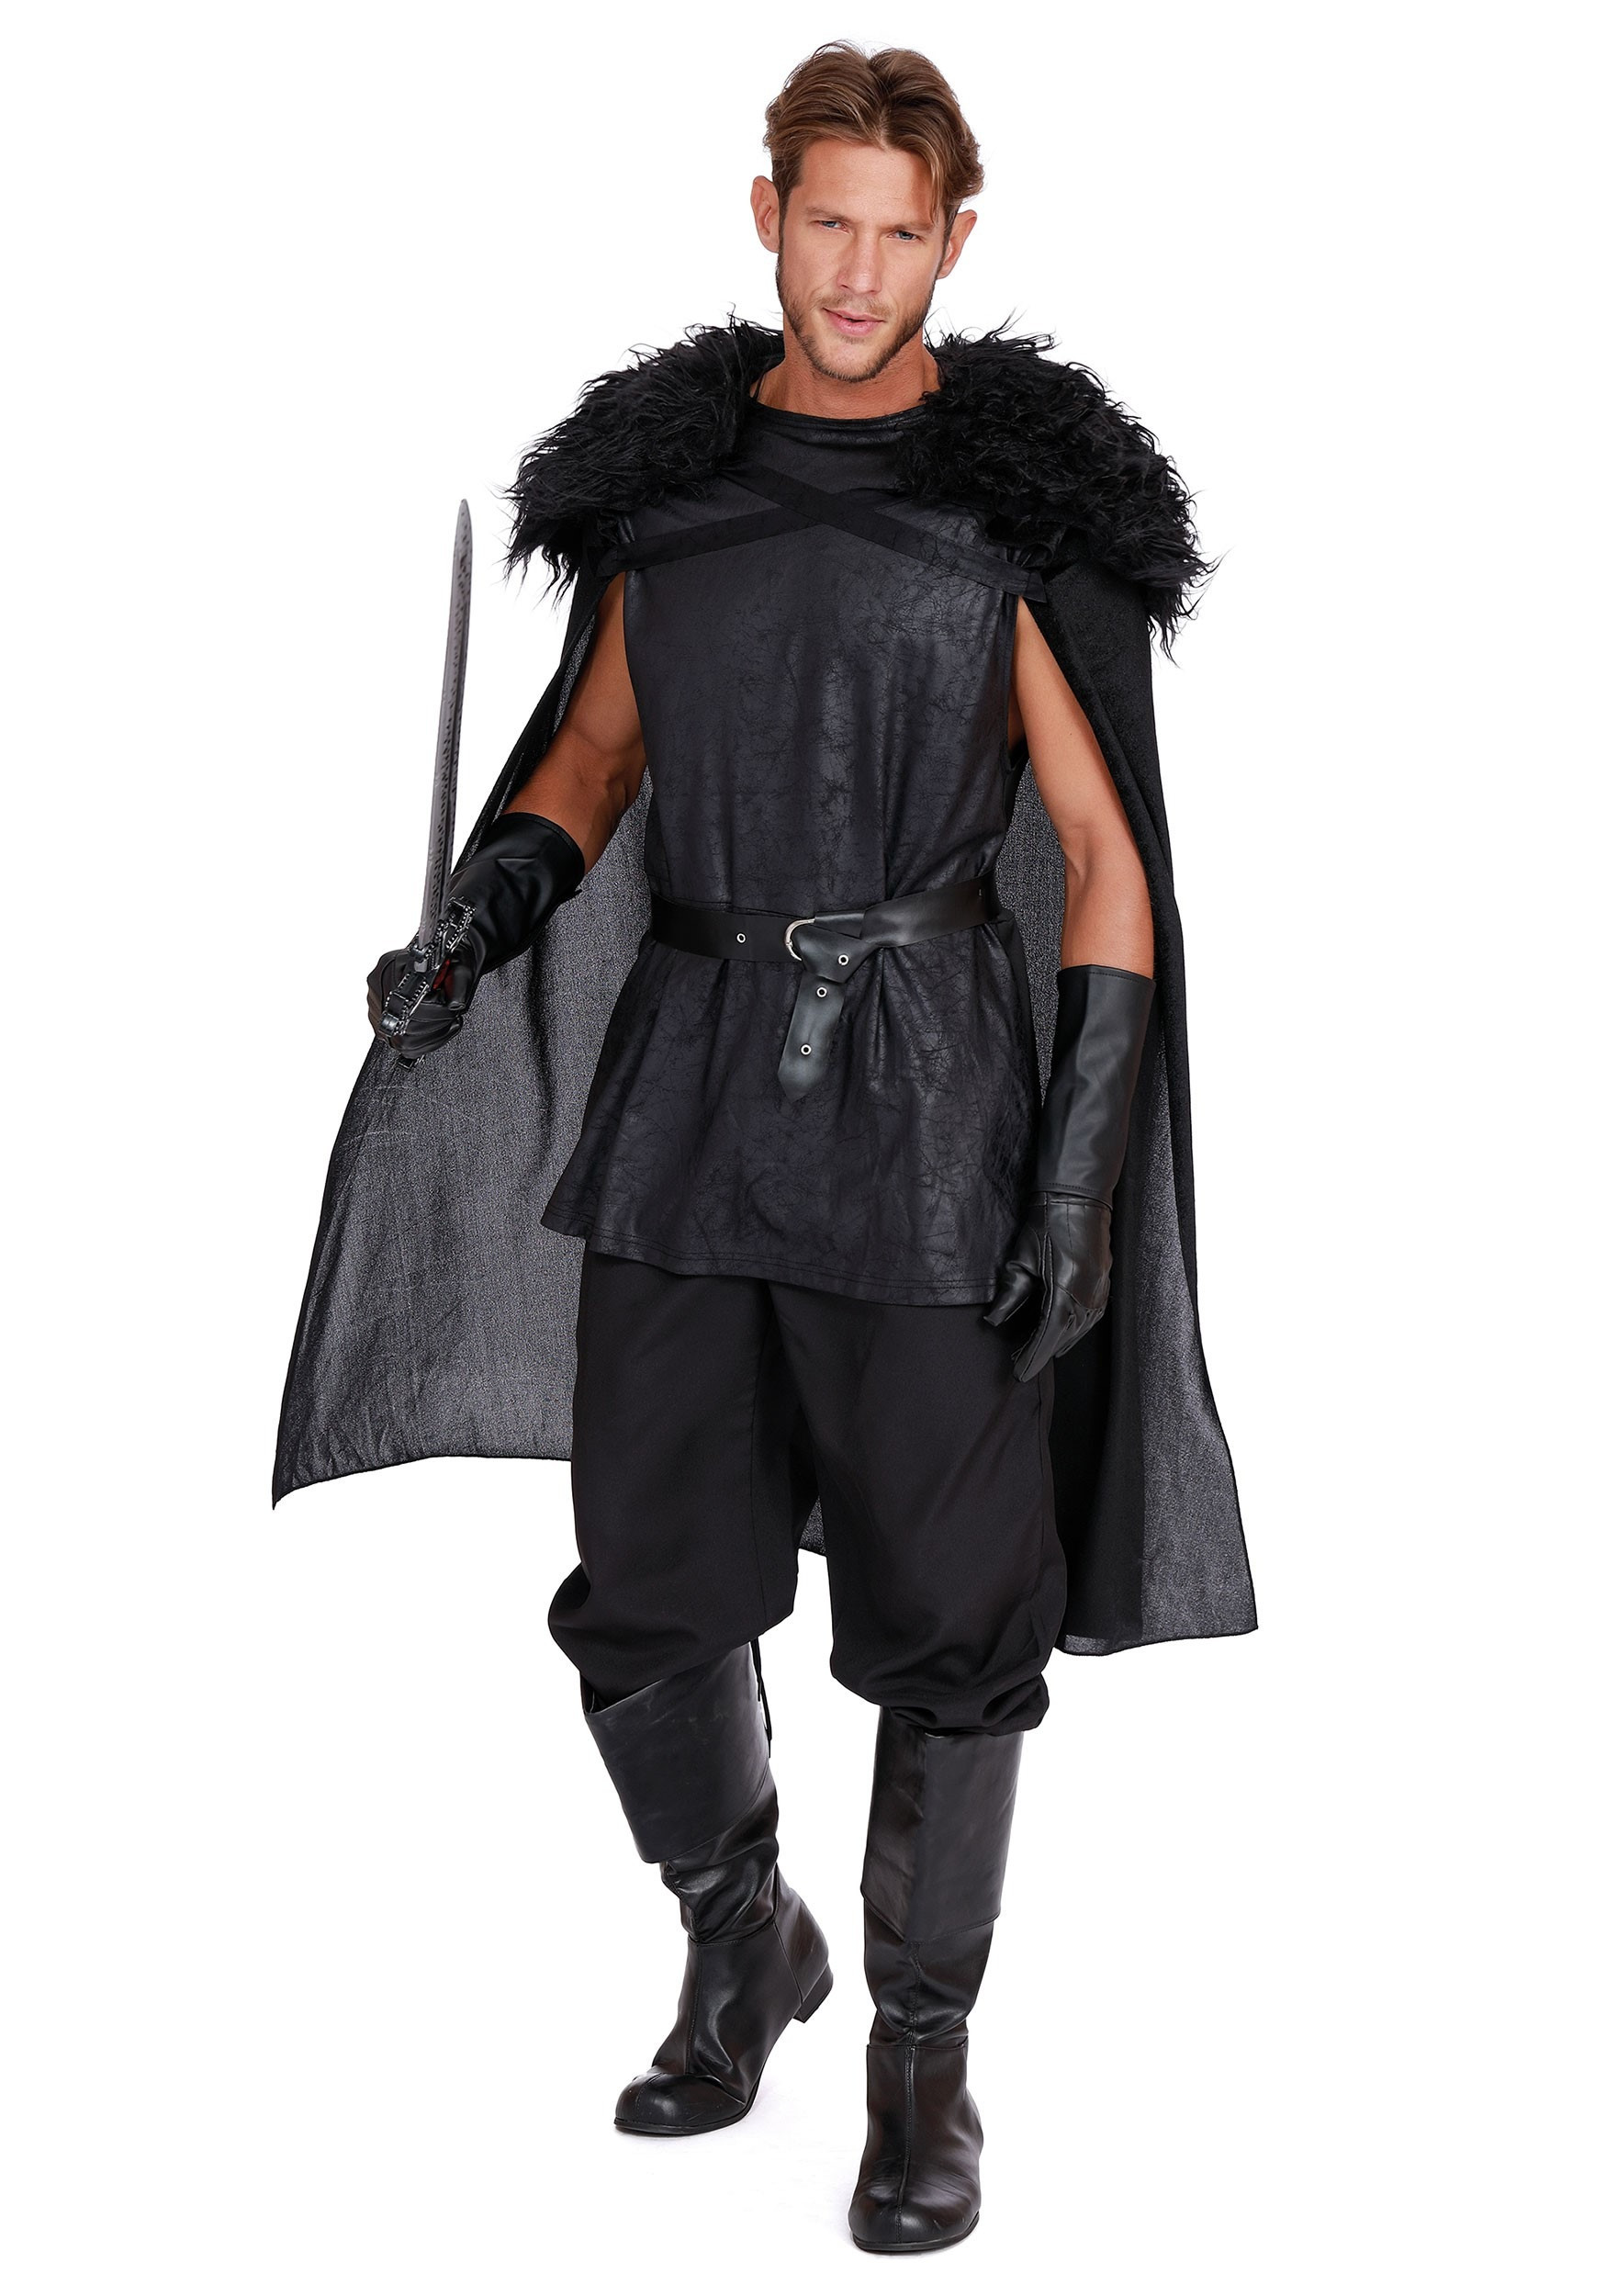 Male Halloween Costume Ideas 2020
 100 Best Halloween Costumes 2020 For Kids & Adults